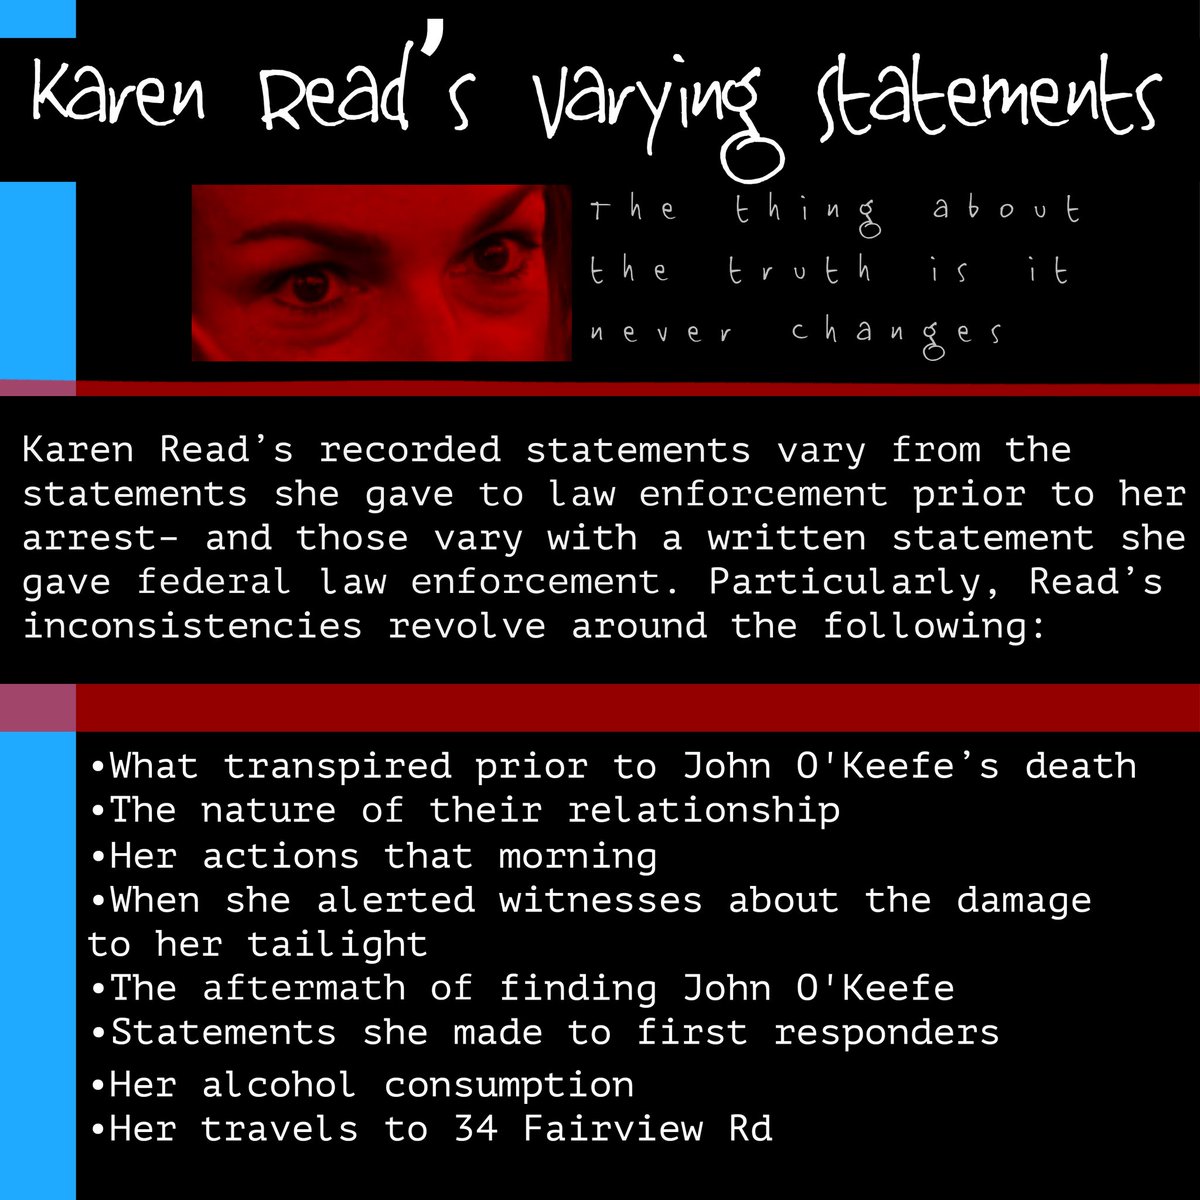 After striking him with her SUV in a fit of rage, an intoxicated and Karen Read left John O'Keefe for dead on the side of the road in freezing temps with a cracked skull. Years later, she continues to abandon him by lying about what really happened But soon, everyone will know.